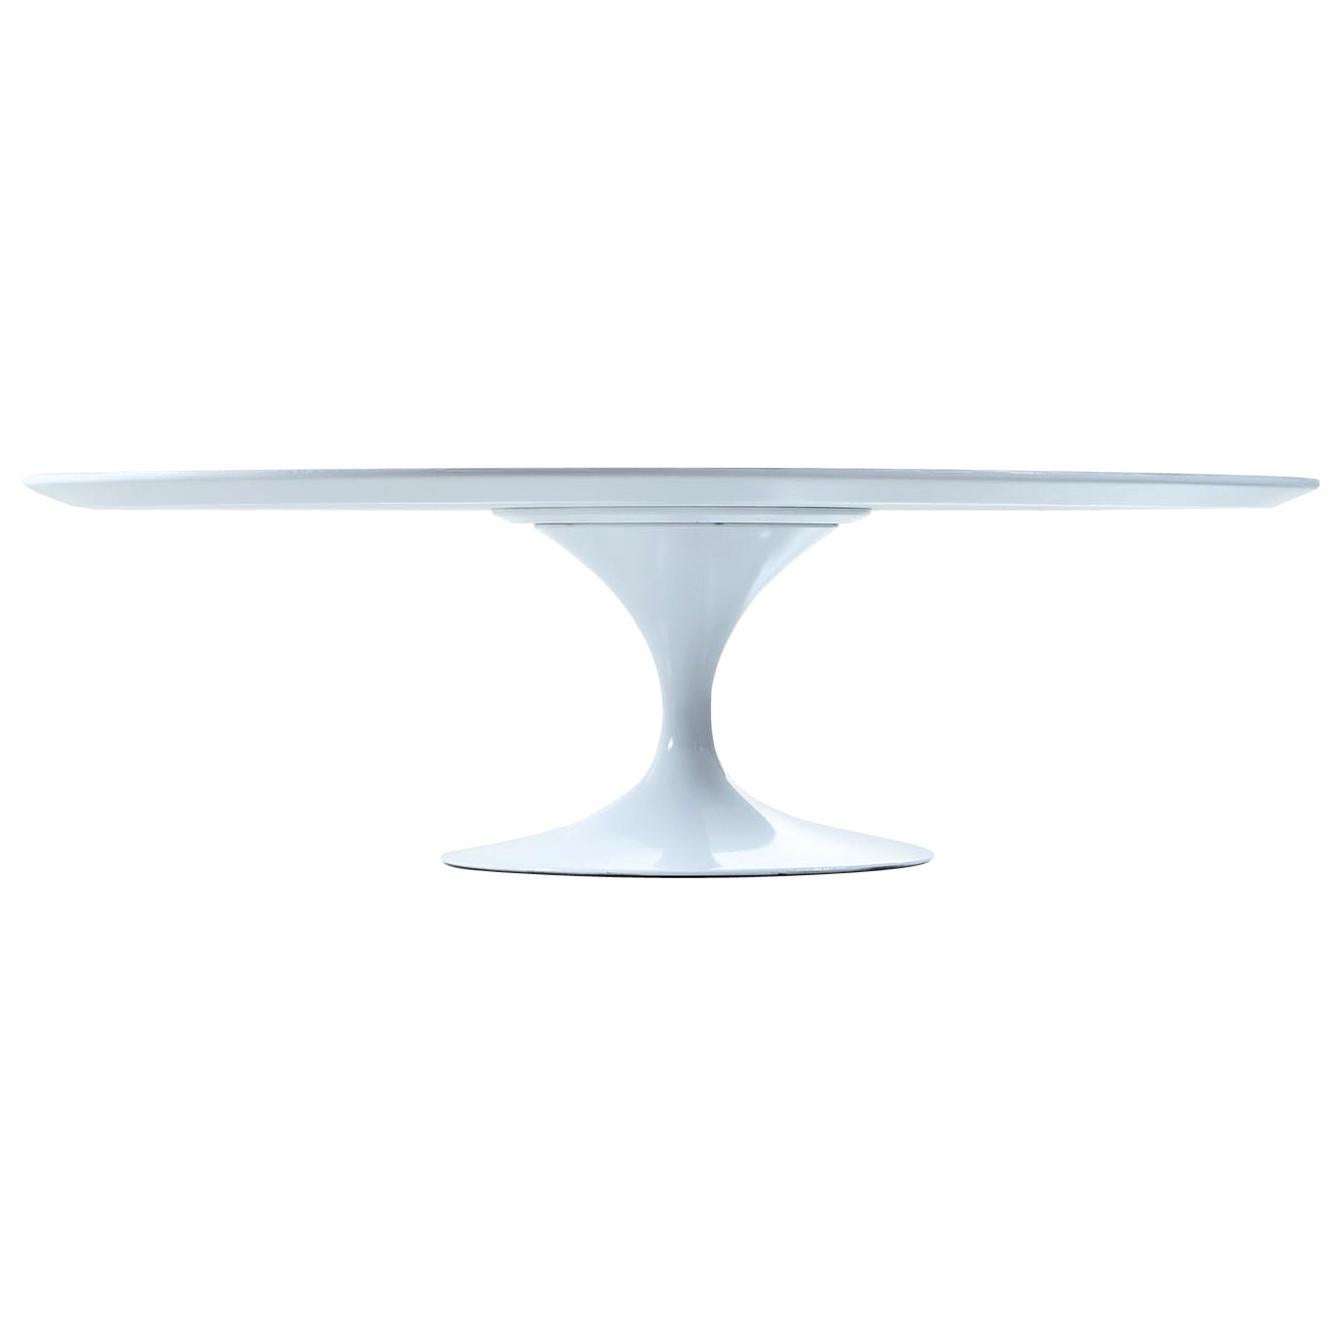 Masterfully restored Mid-Century Modern Eero Saarinen pedestal coffee table for Knoll. Early vintage with Knoll stamped into the underside of the metal base. This coffee table has been brought back to its original splendor with a new professionally